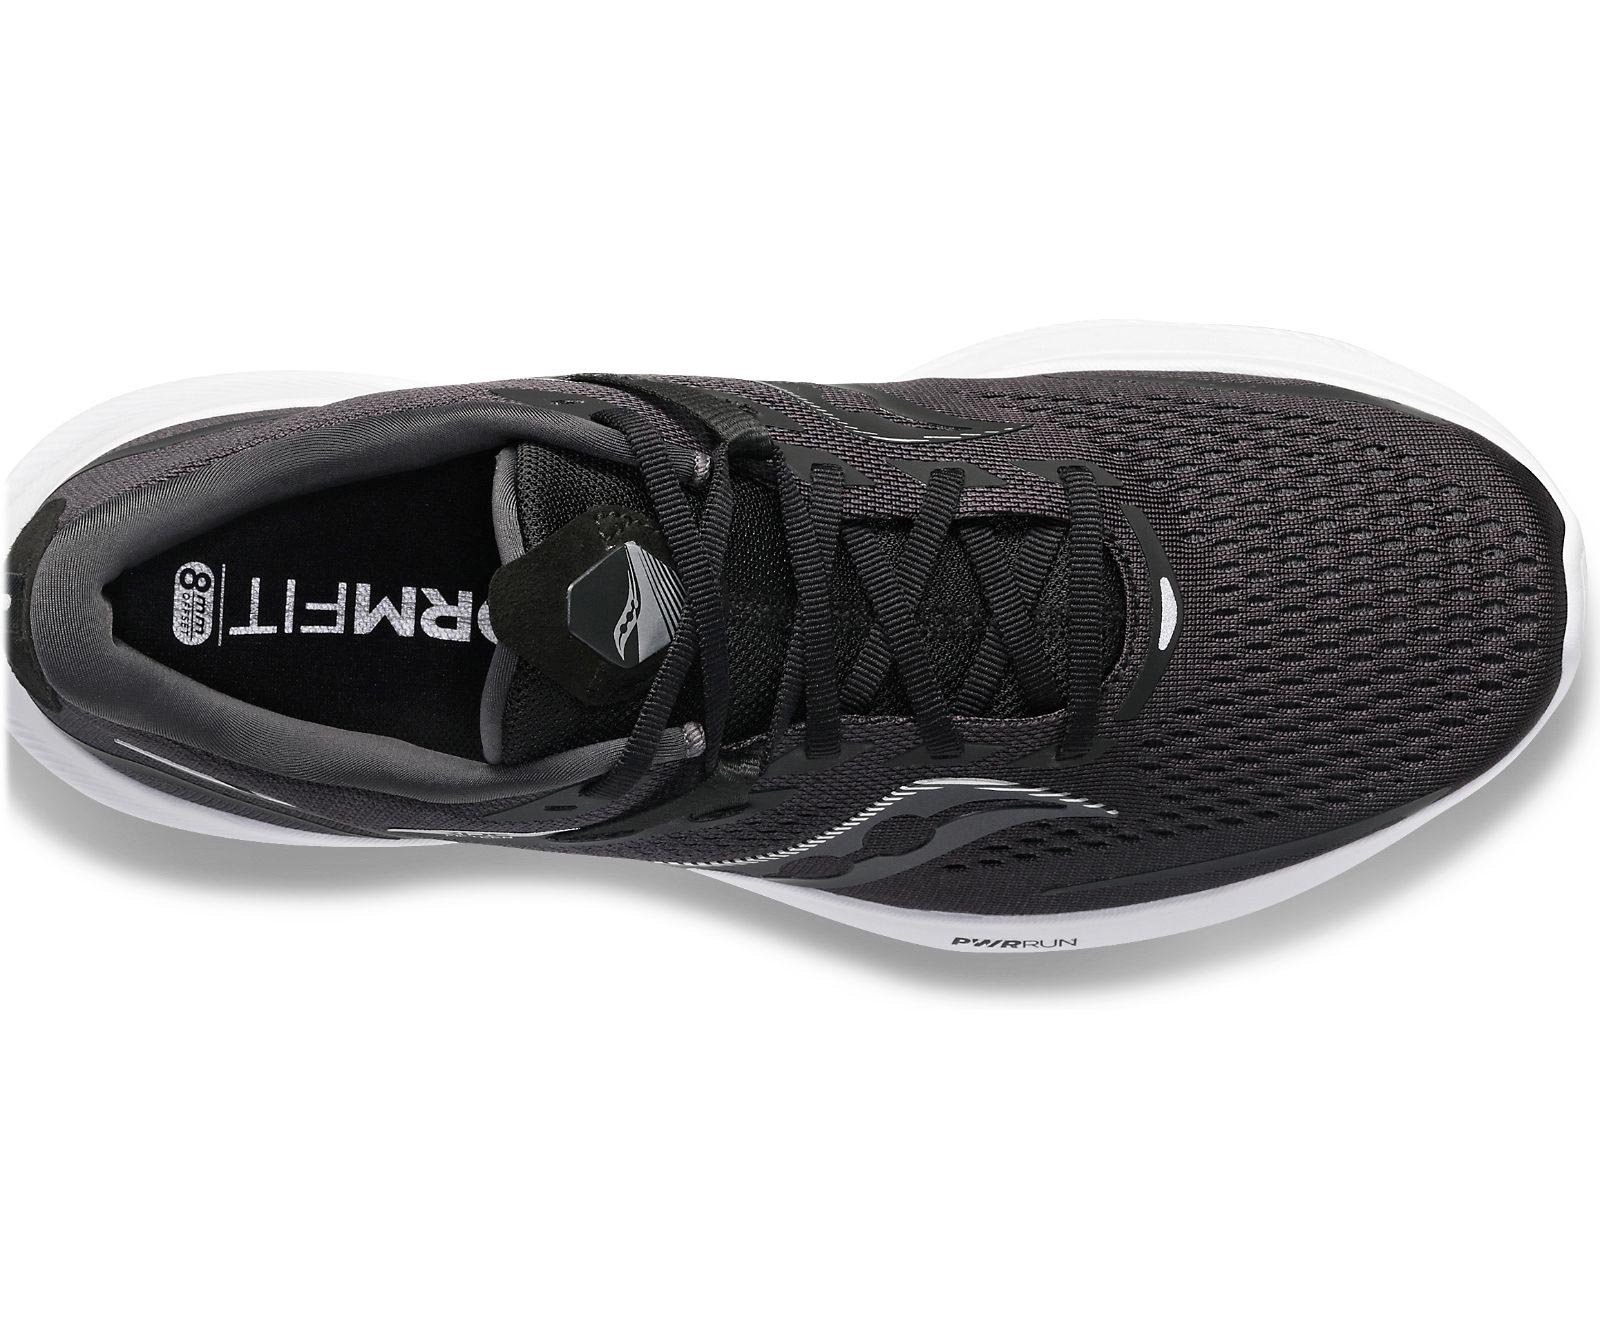 SAUCONY RIDE 15 MENS RUNNING SHOES